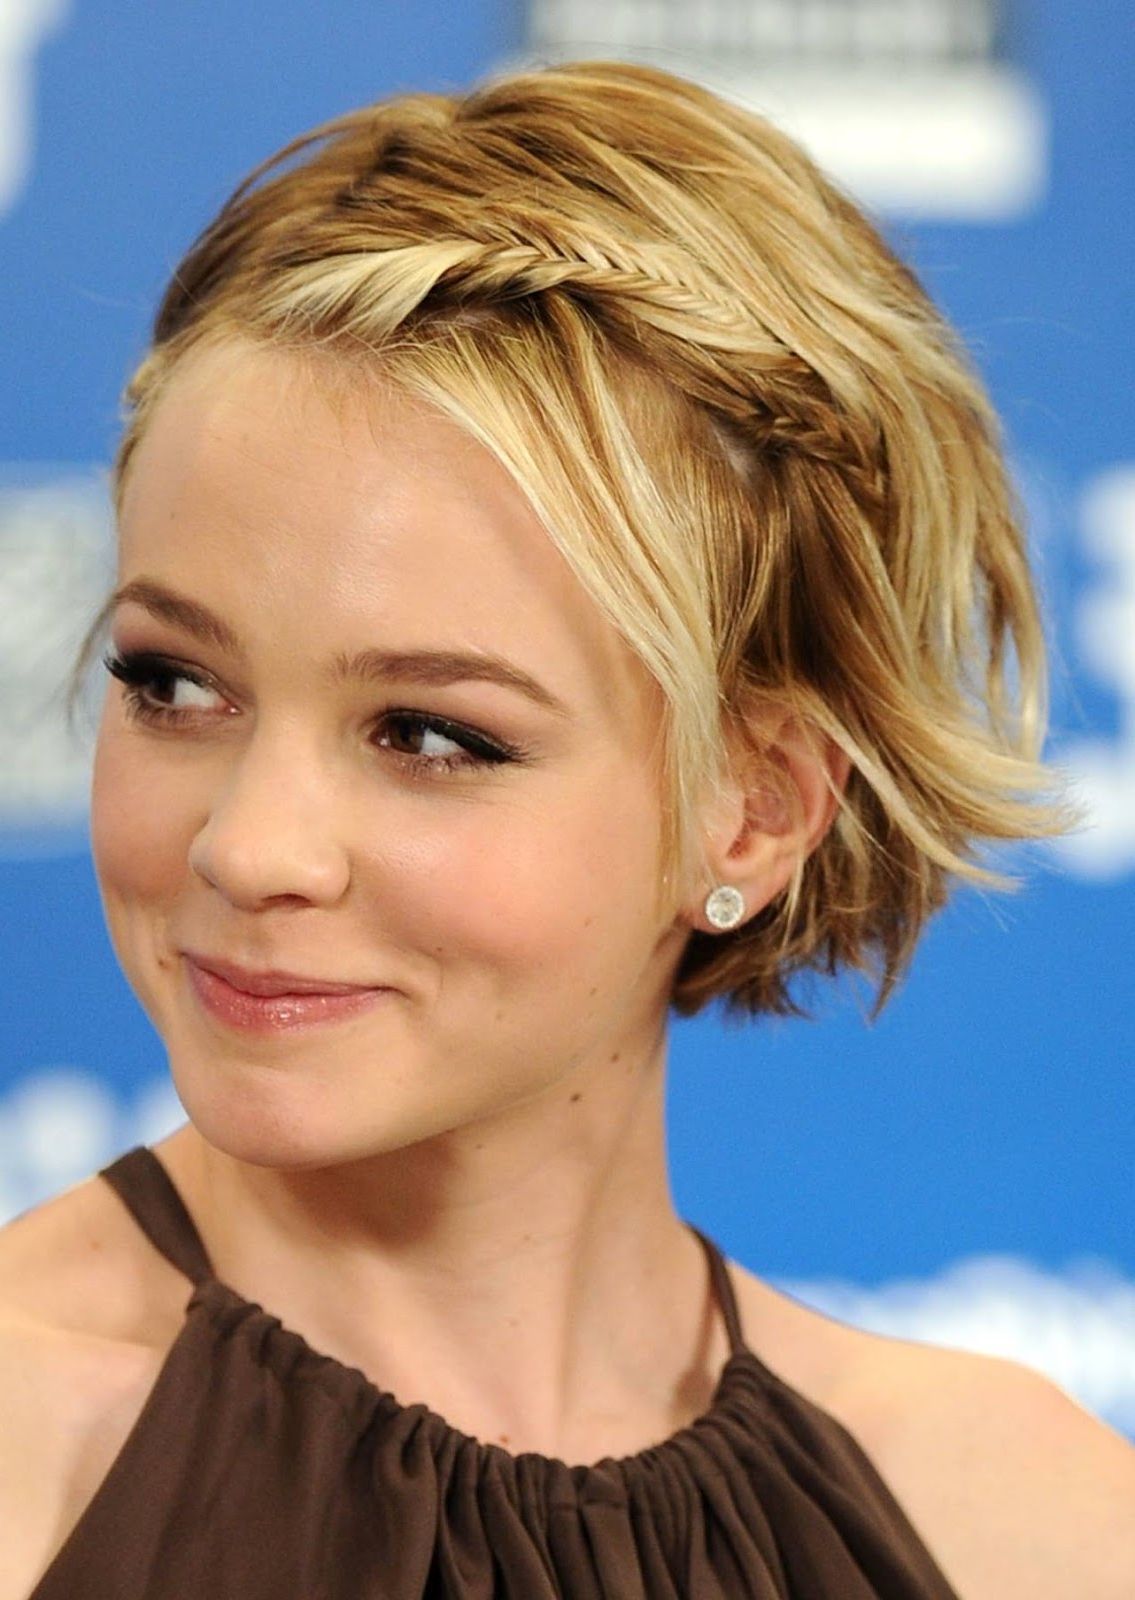 30 Best Short Hair Cuts To Improve Your Style In Cute Hairstyles For Really Short Hair (View 14 of 25)